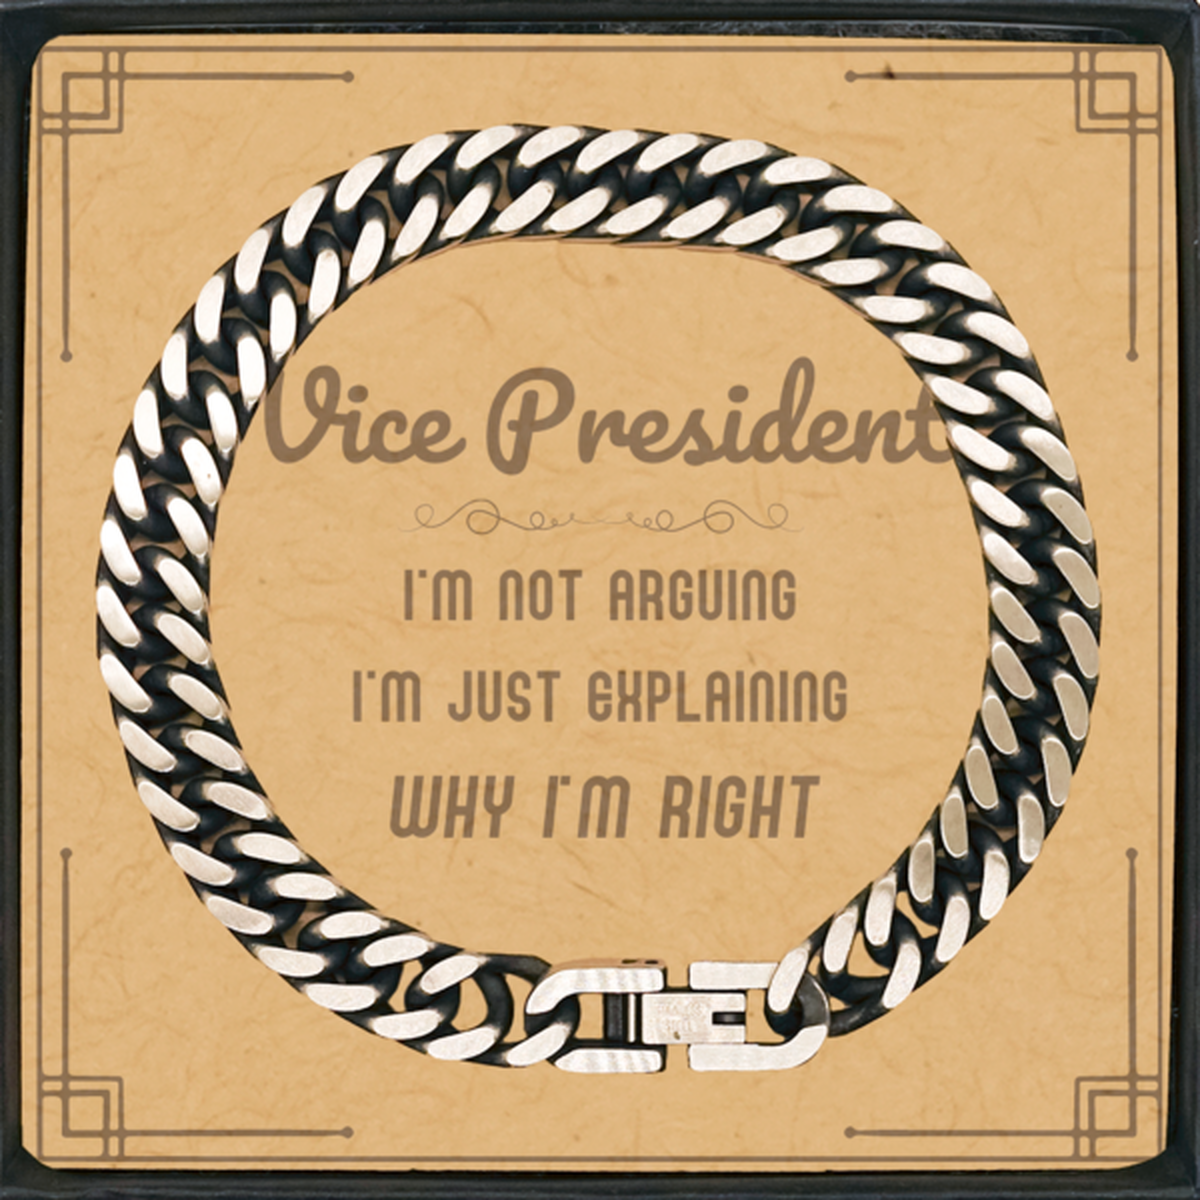 Vice President I'm not Arguing. I'm Just Explaining Why I'm RIGHT Cuban Link Chain Bracelet, Funny Saying Quote Vice President Gifts For Vice President Message Card Graduation Birthday Christmas Gifts for Men Women Coworker